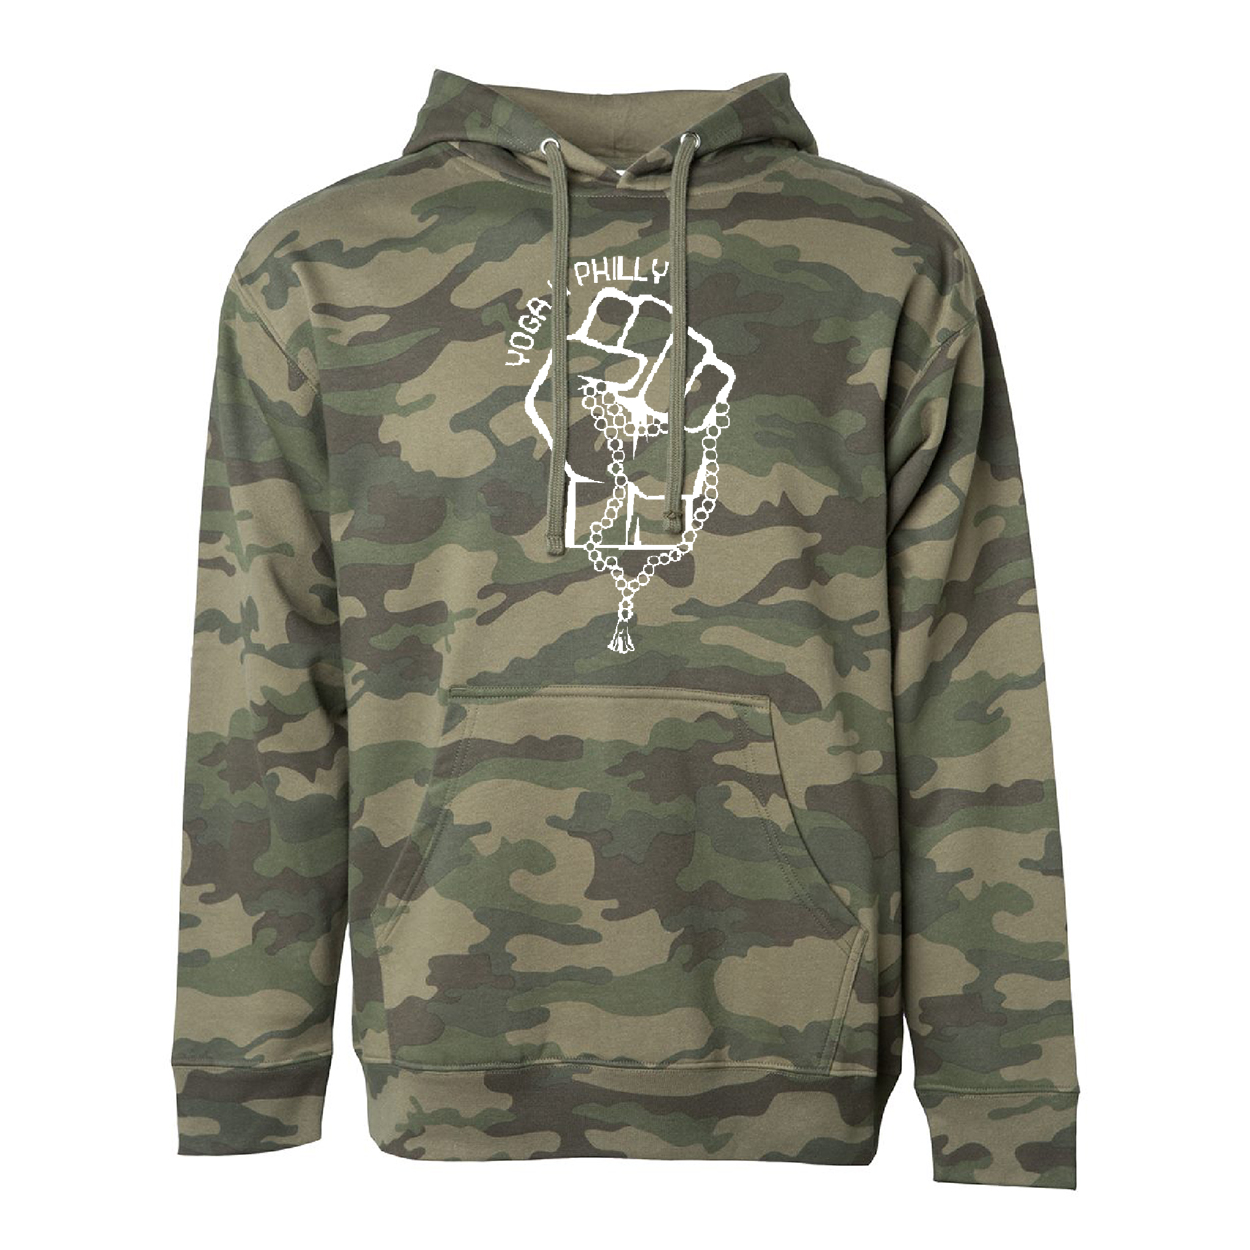 Yoga 4 philly Forest_Camo hoodie